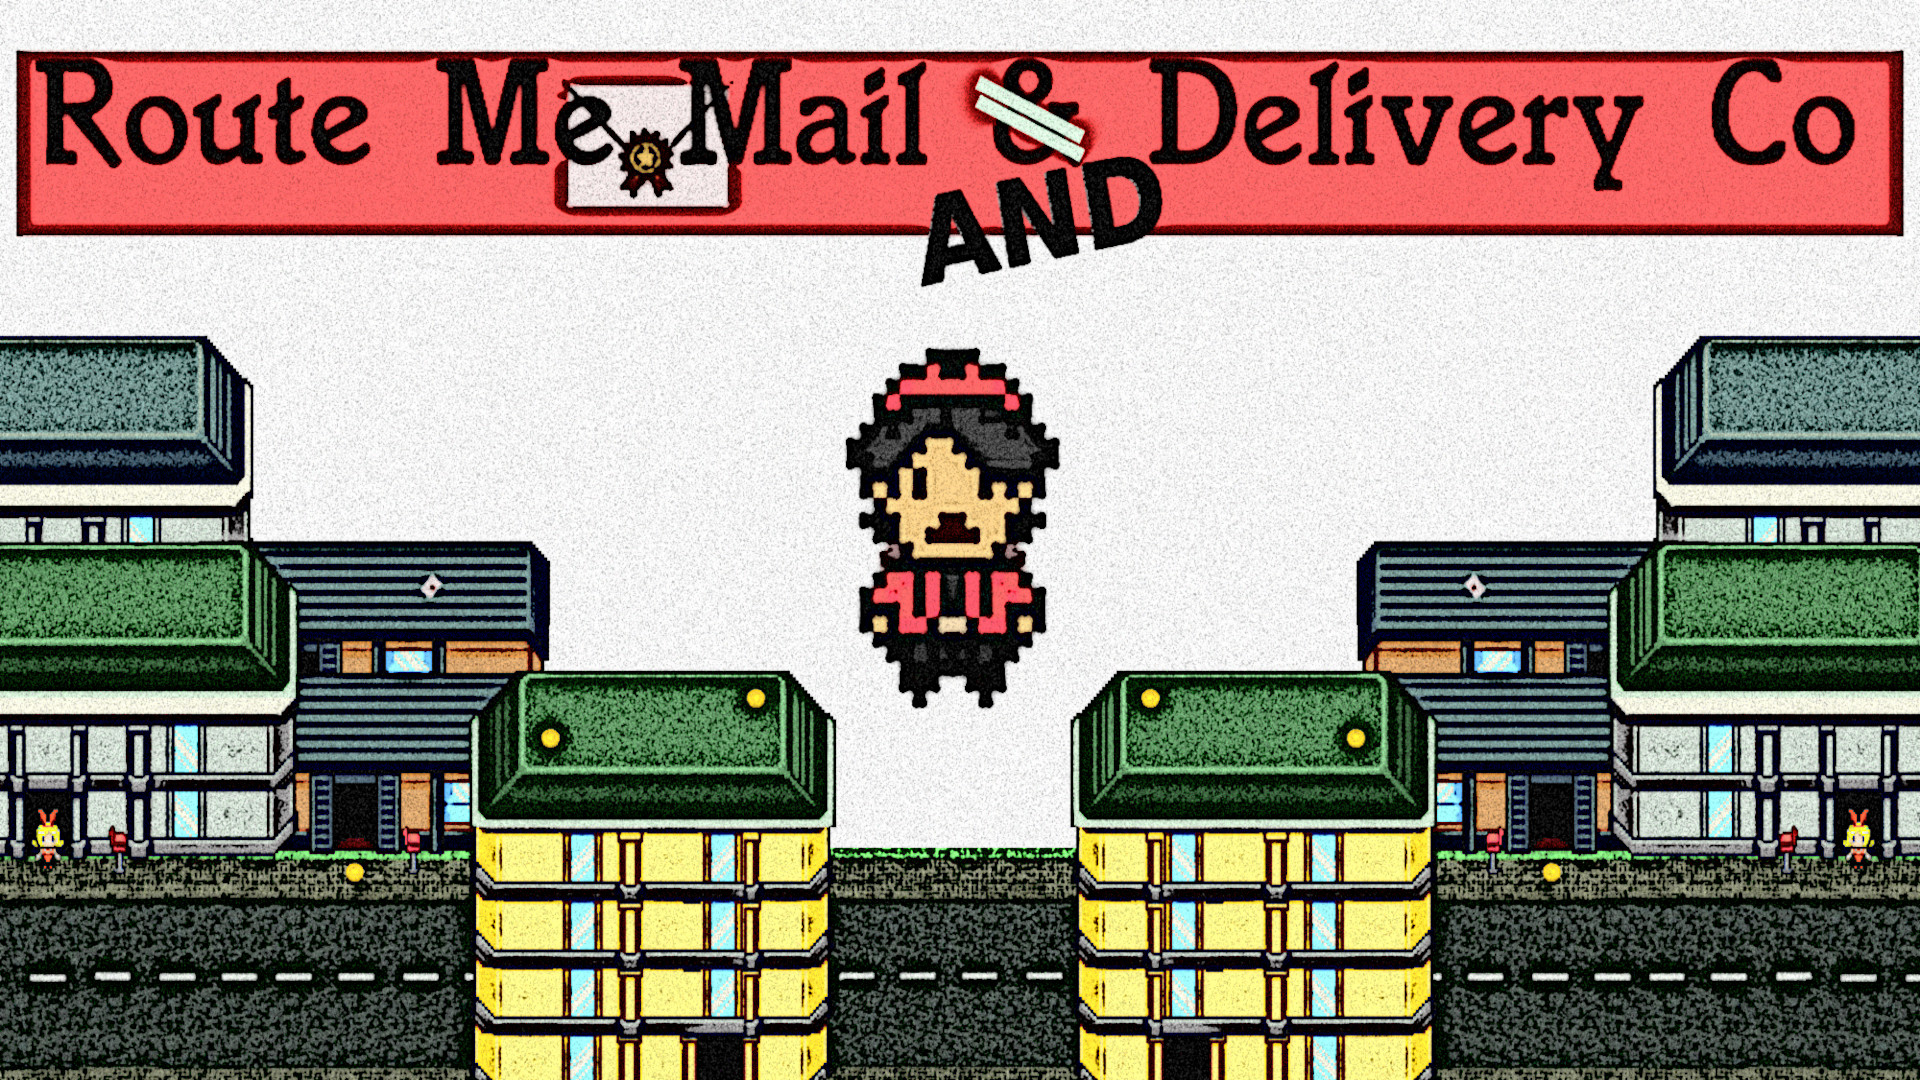 Route Me Mail and Delivery Co